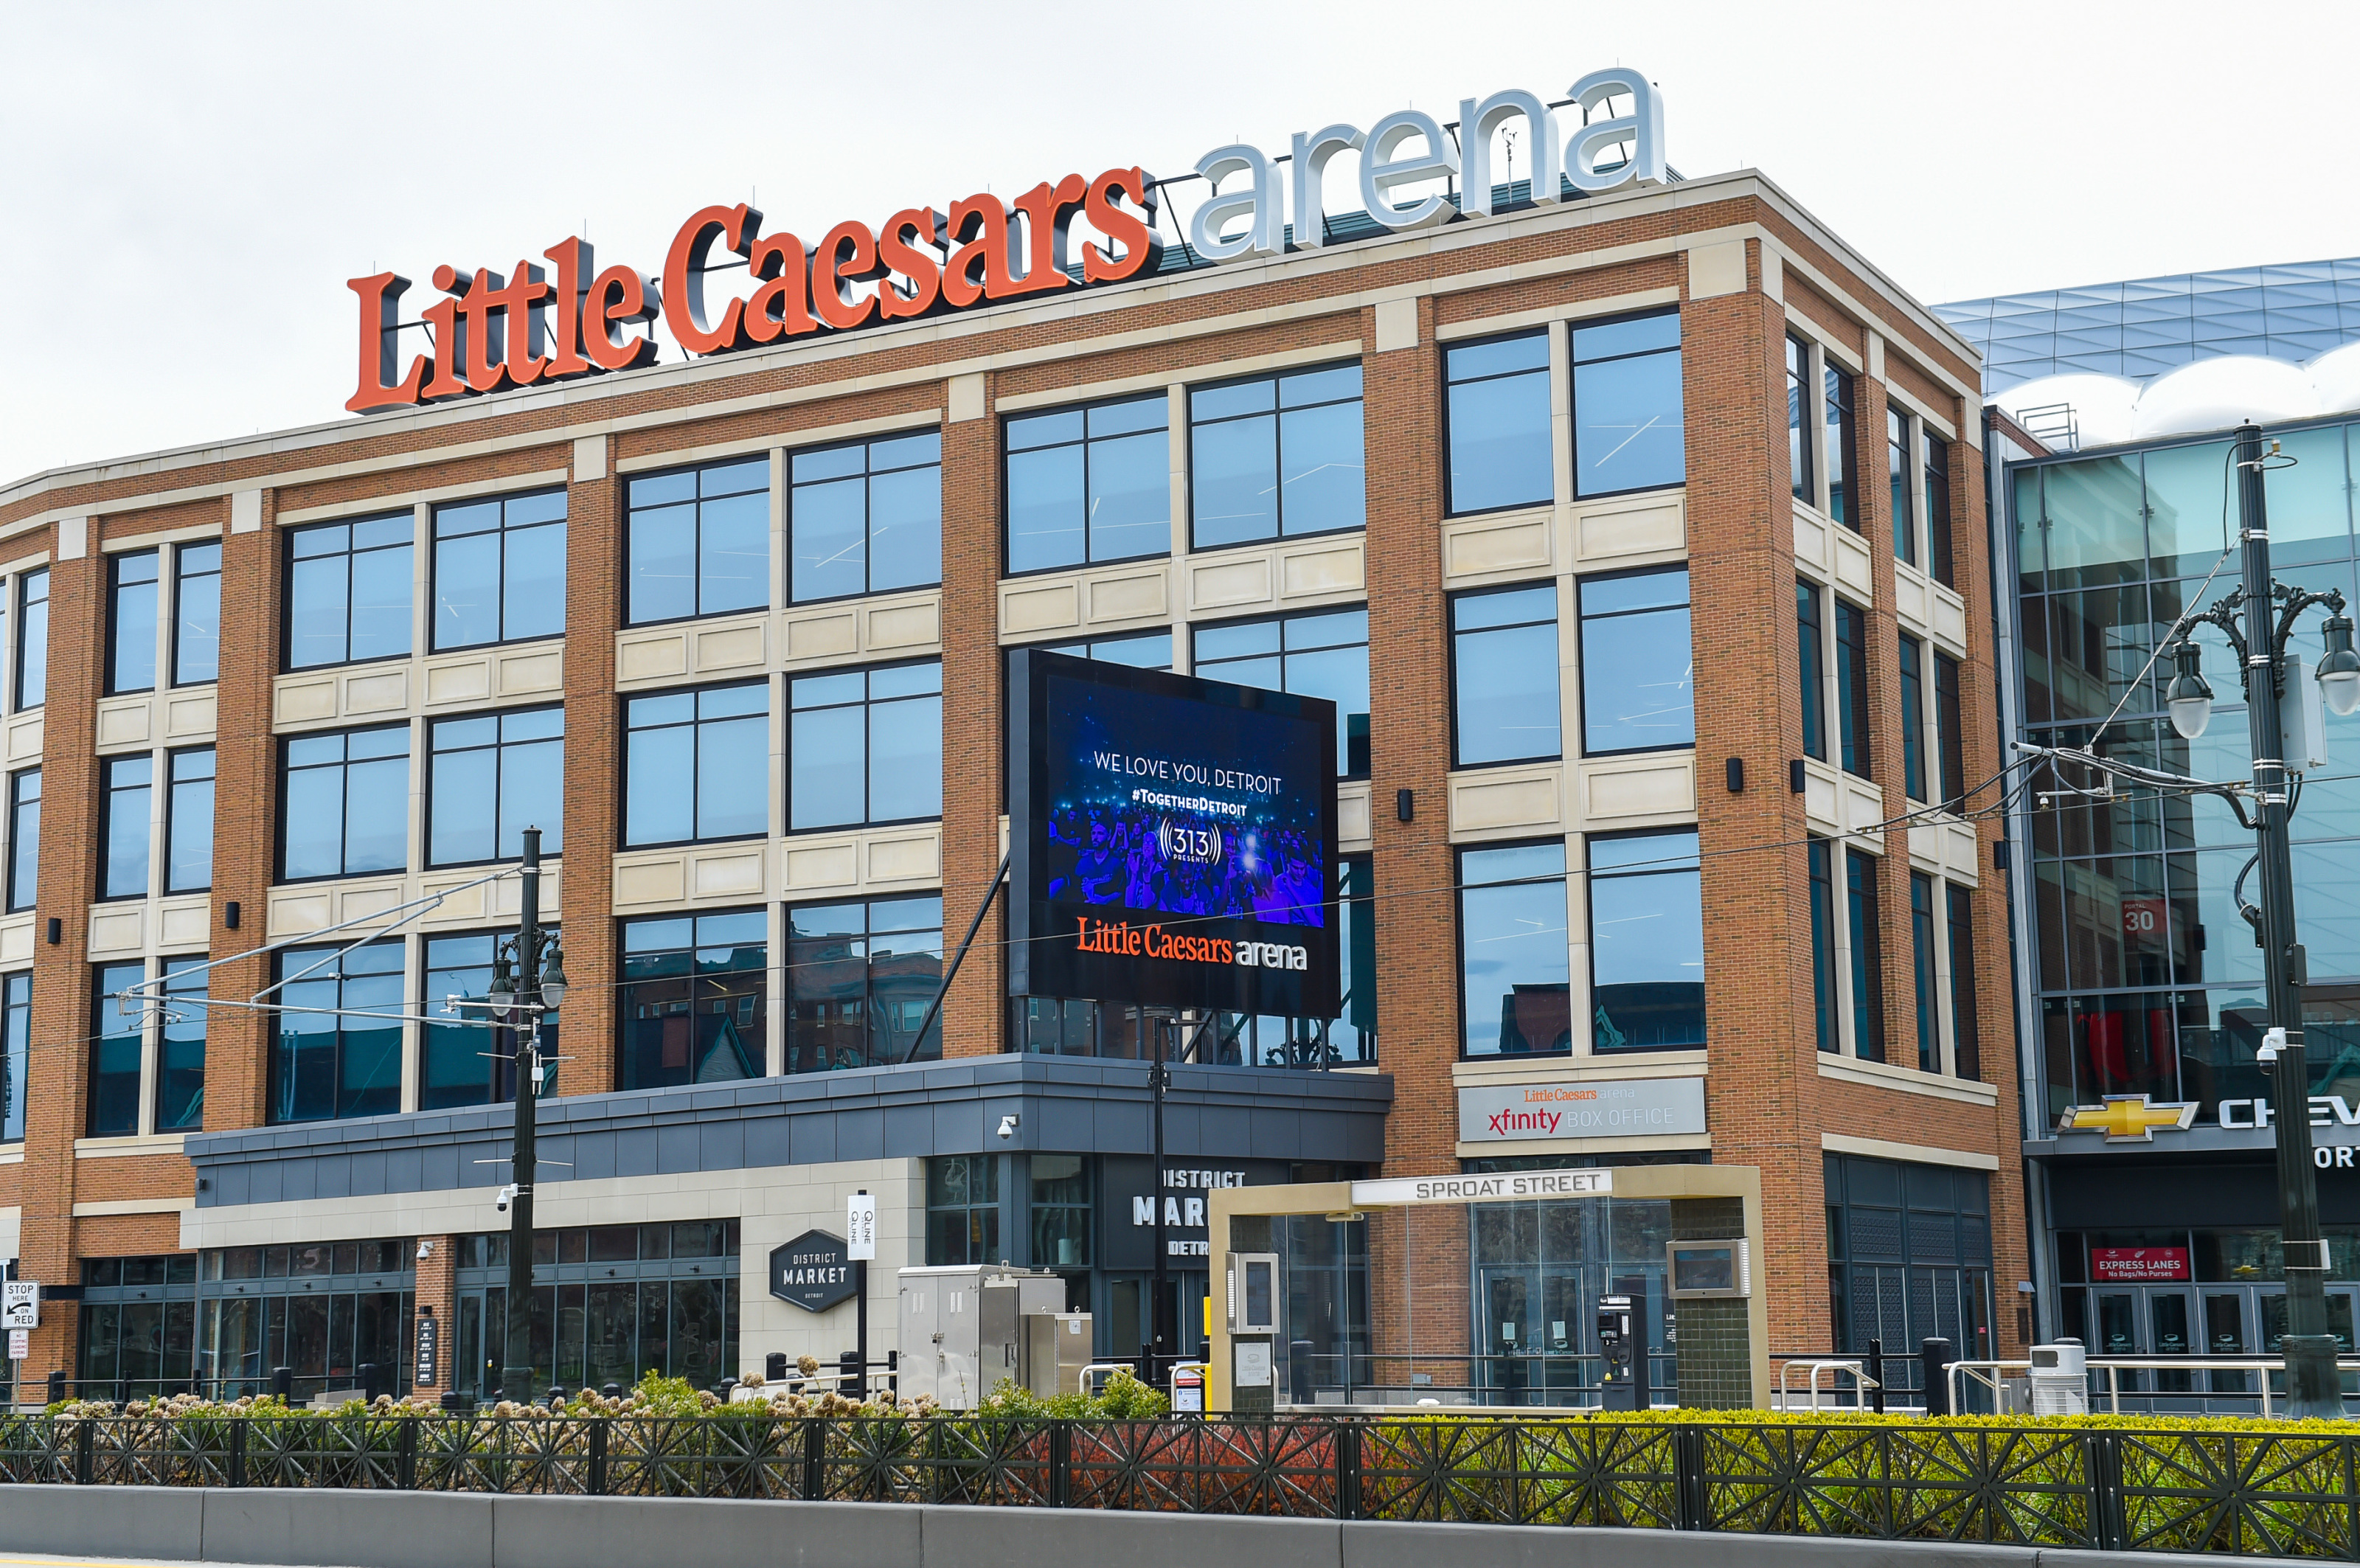 COVID-19 protocols Detroit Pistons fans can expect at Little Caesars Arena  